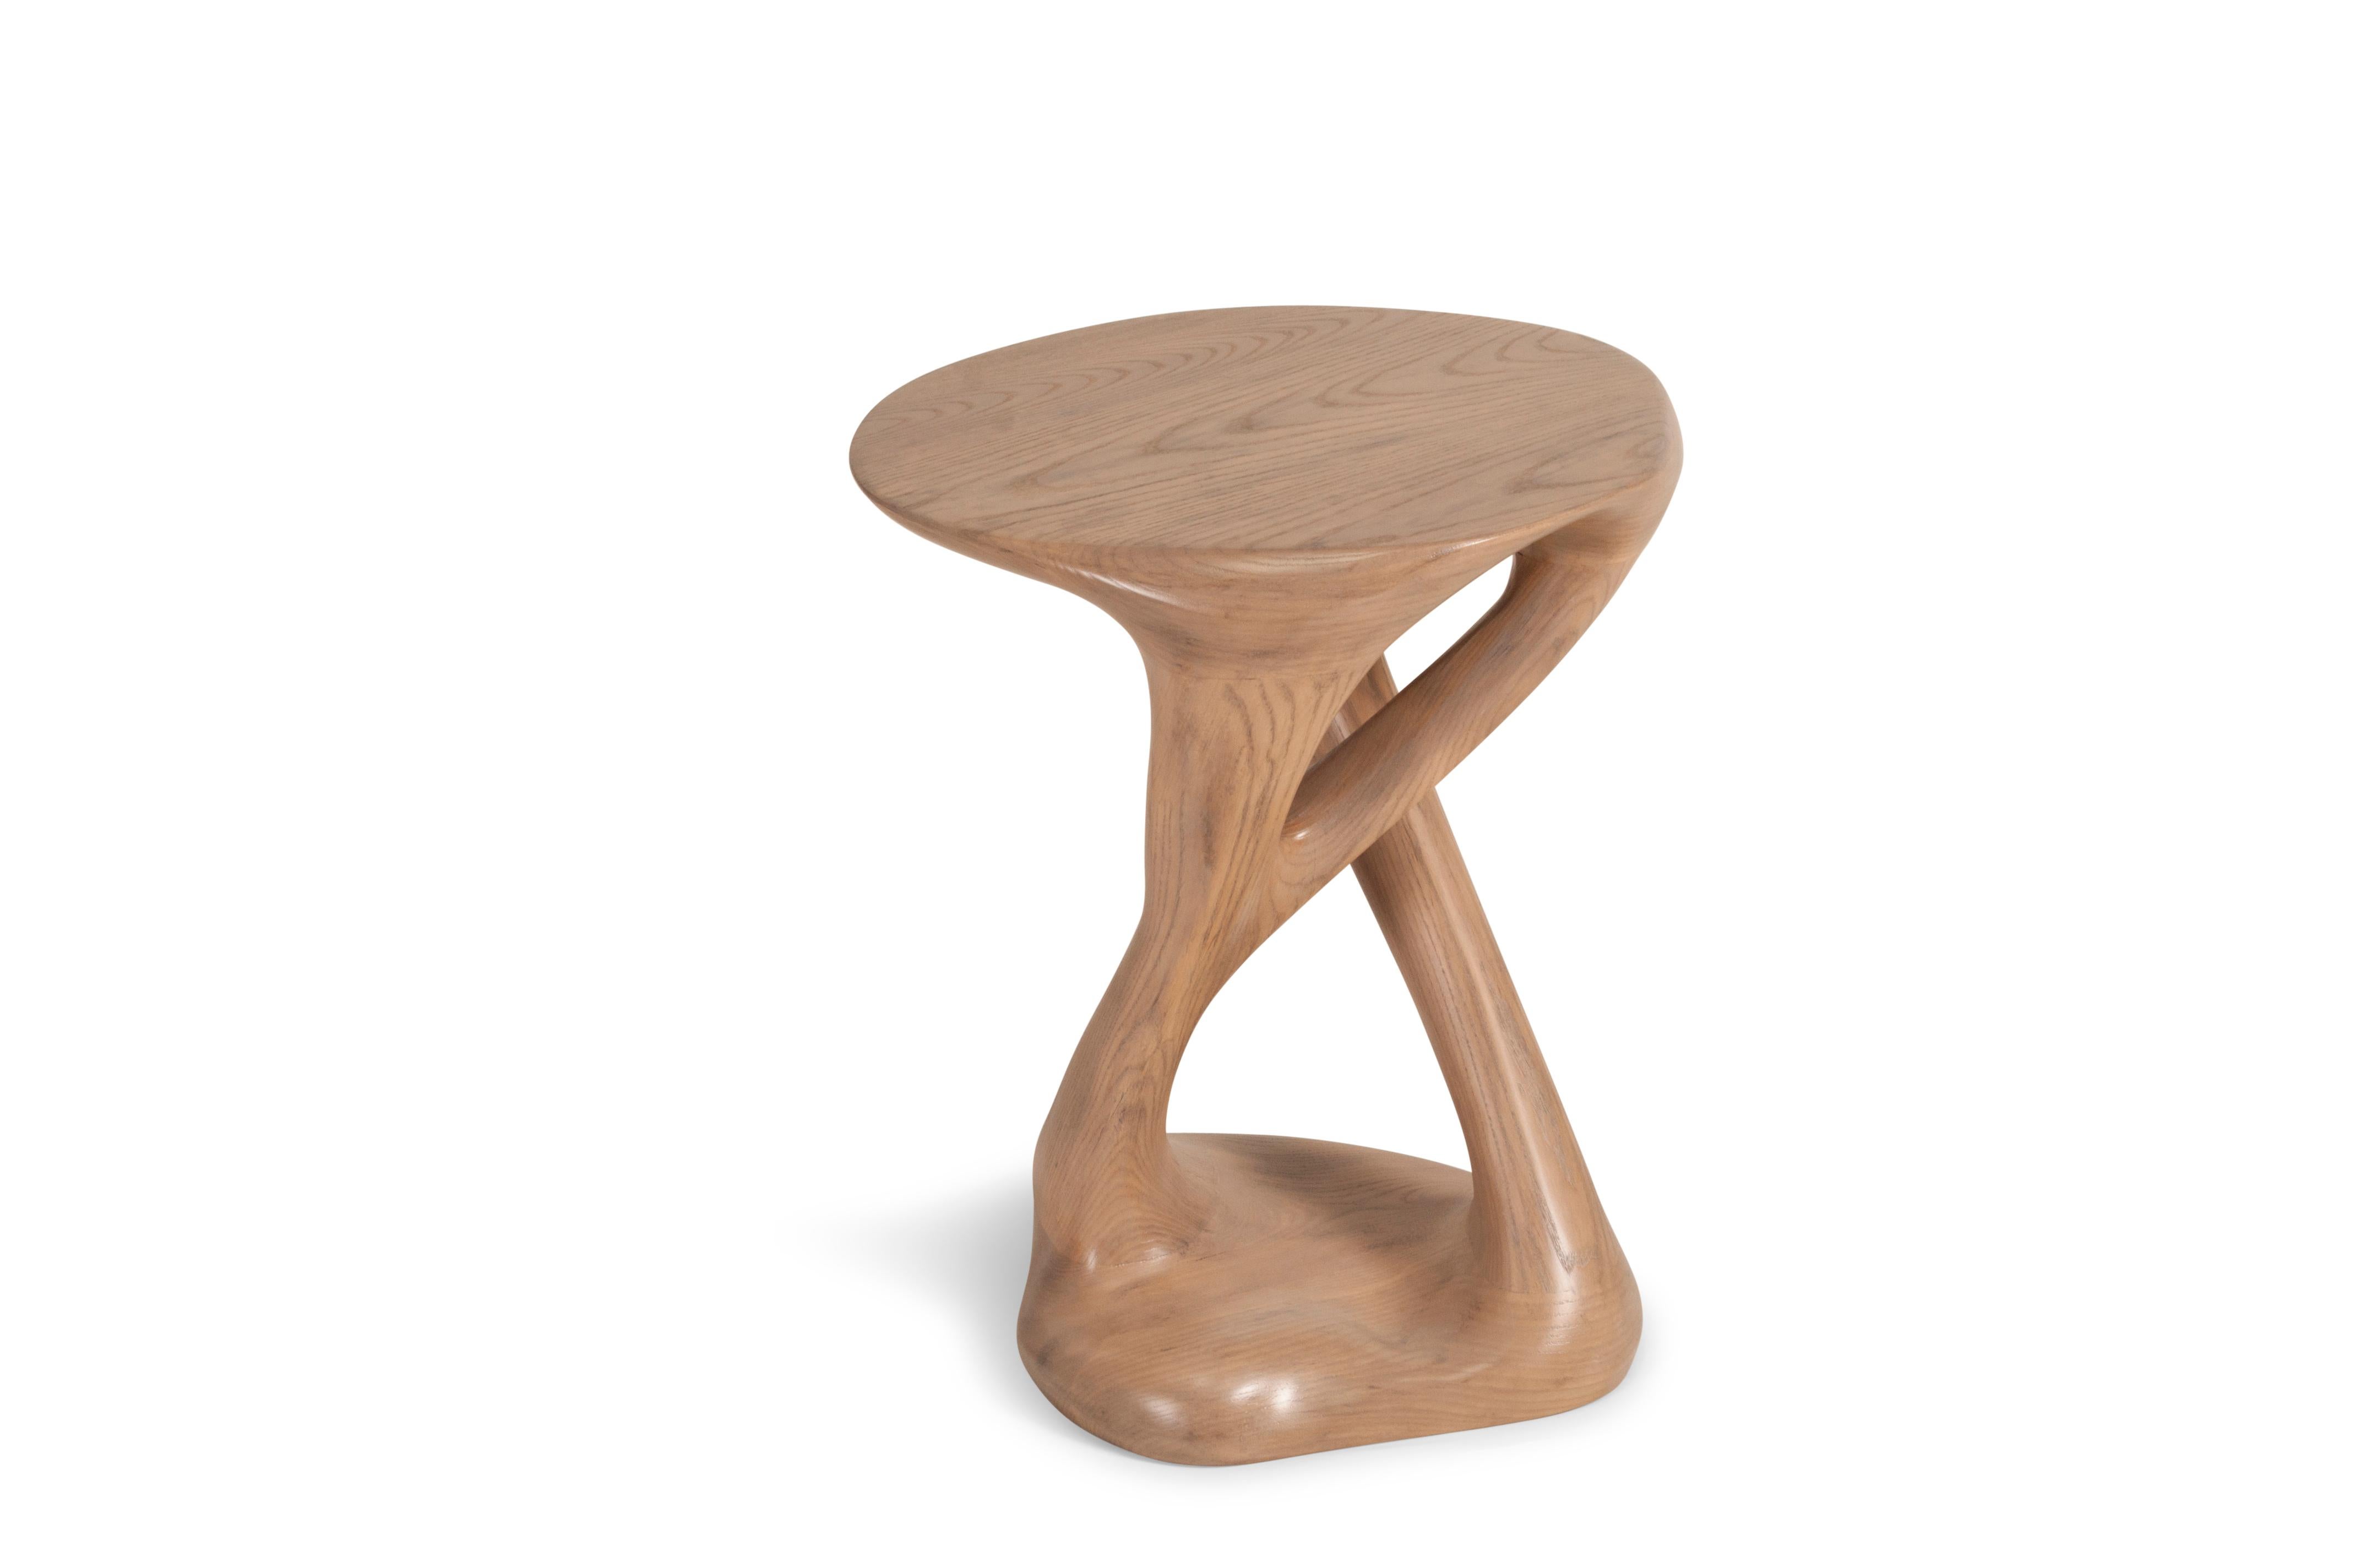 Organic Modern Sasha Side Table in Antique Oak stain on Ash wood  For Sale